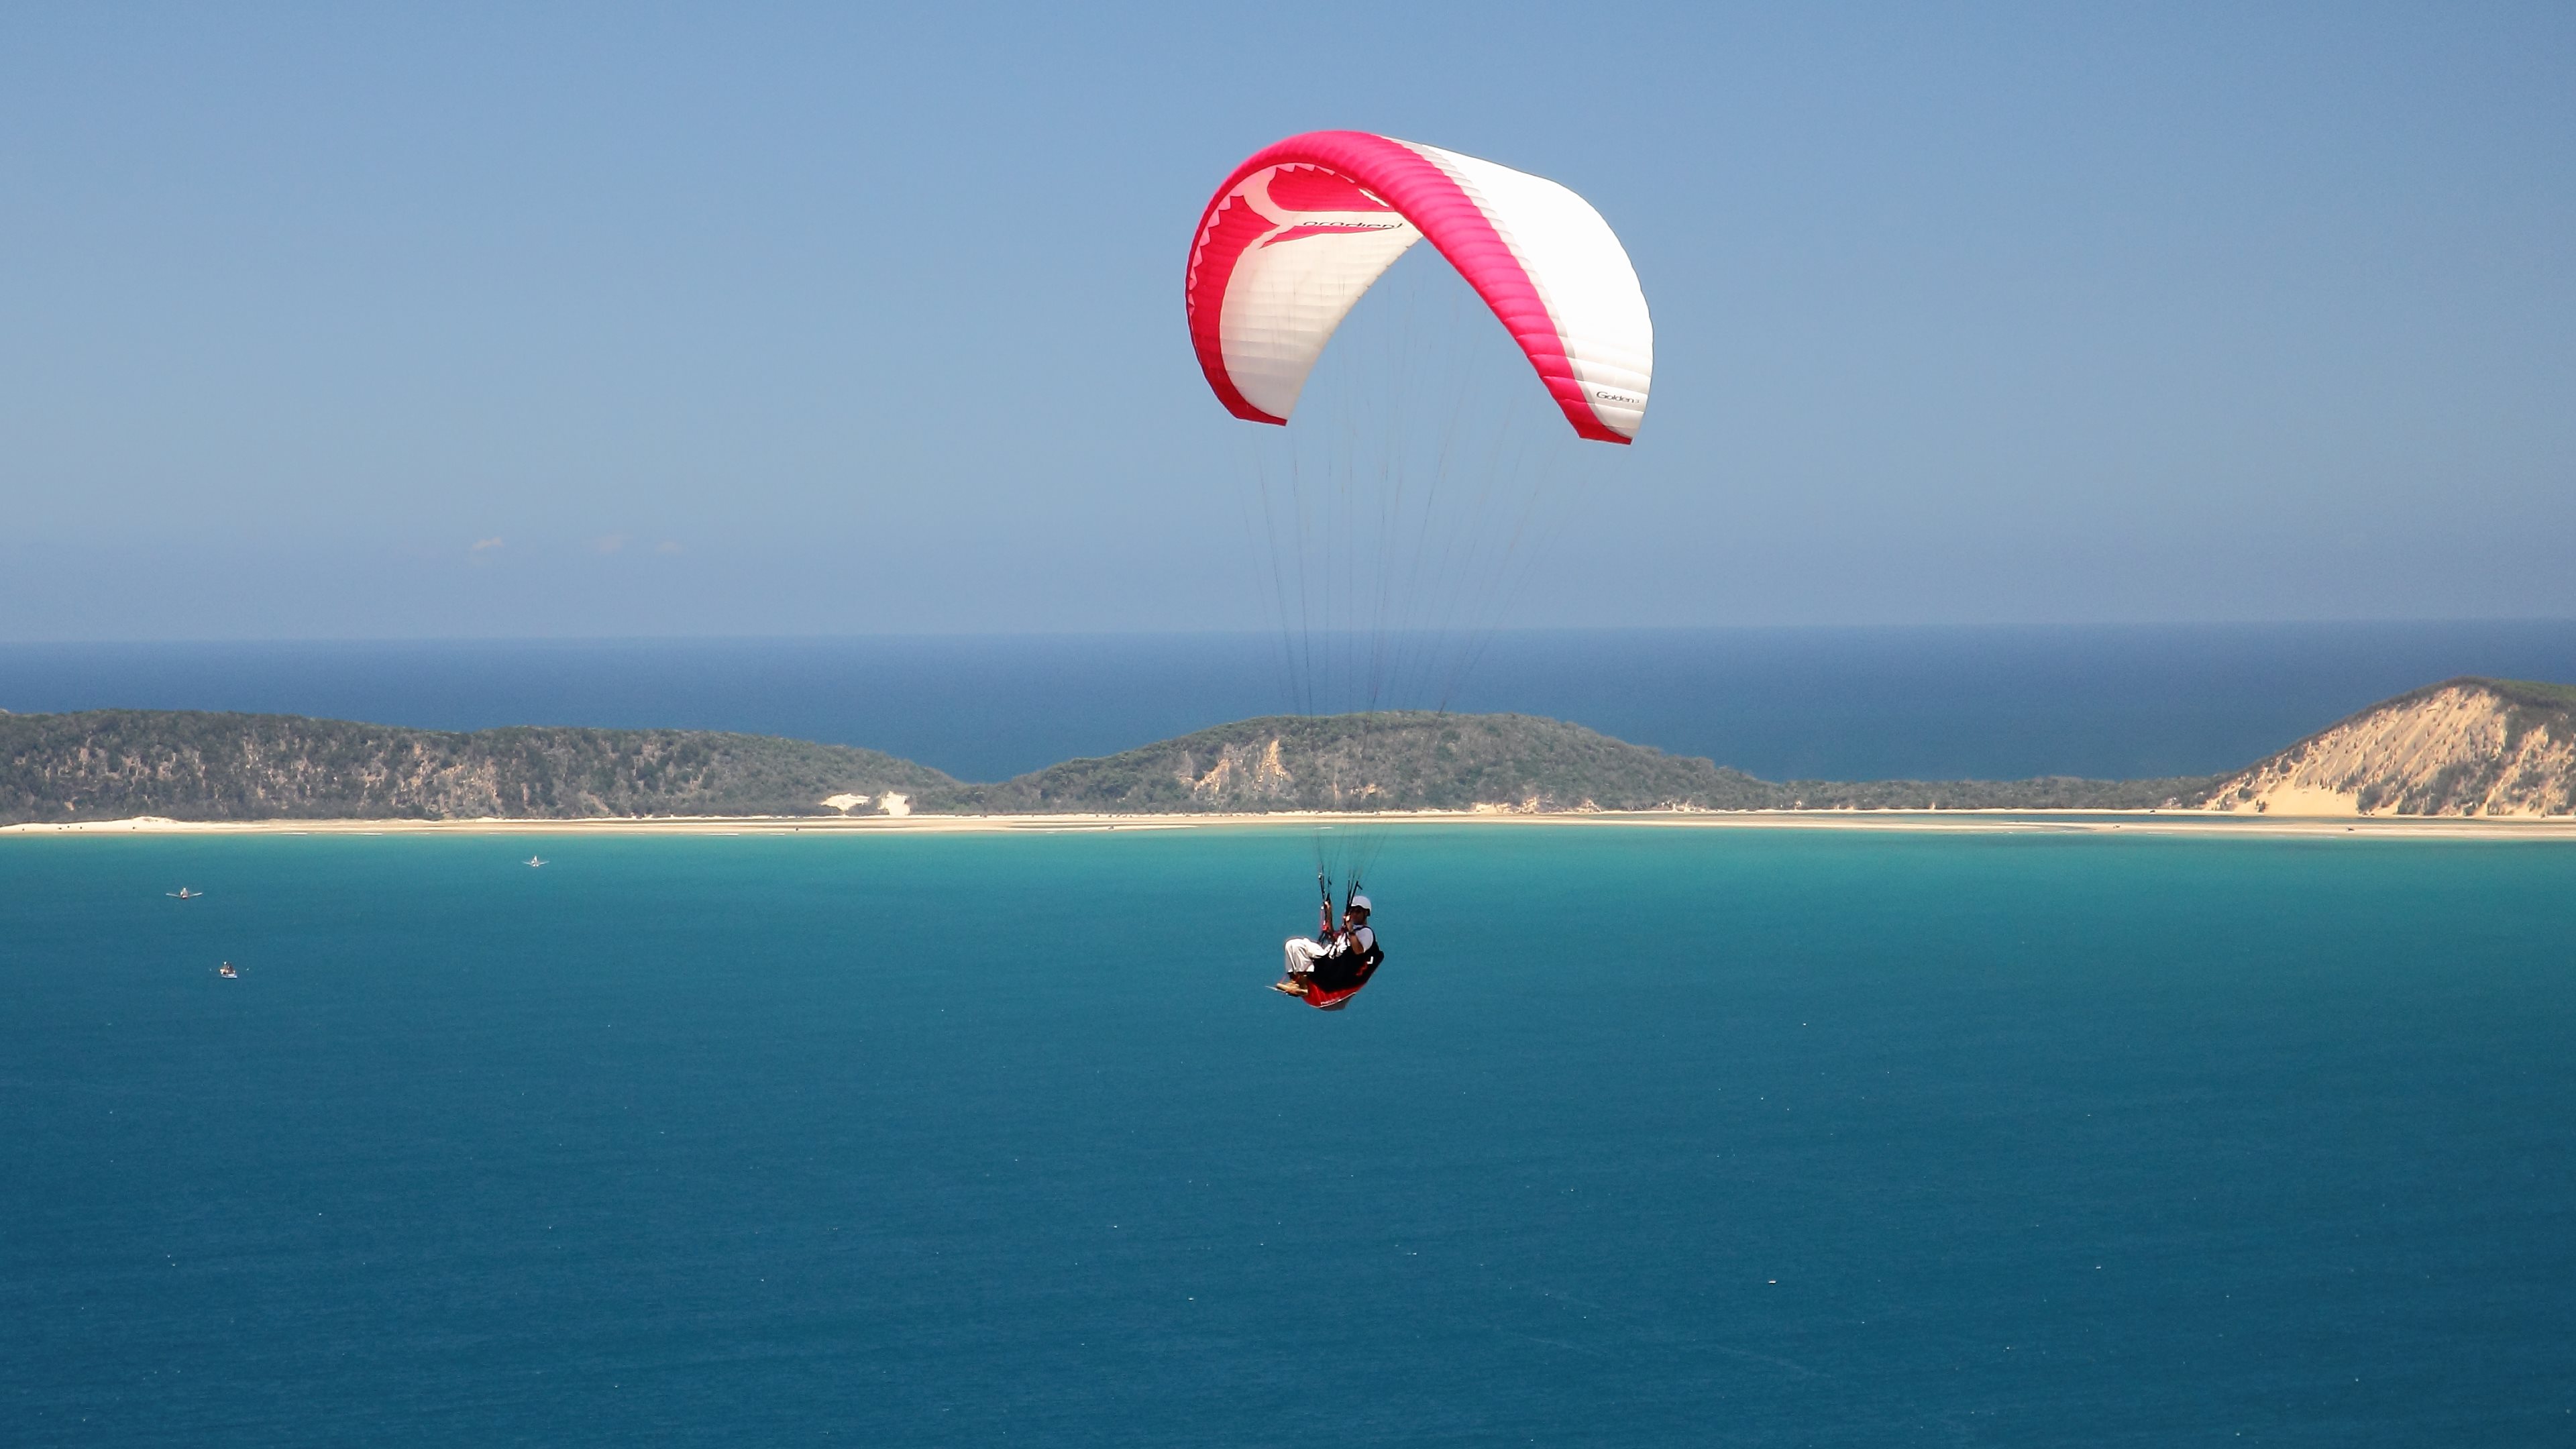 collection of best Paragliding HD wallpaper